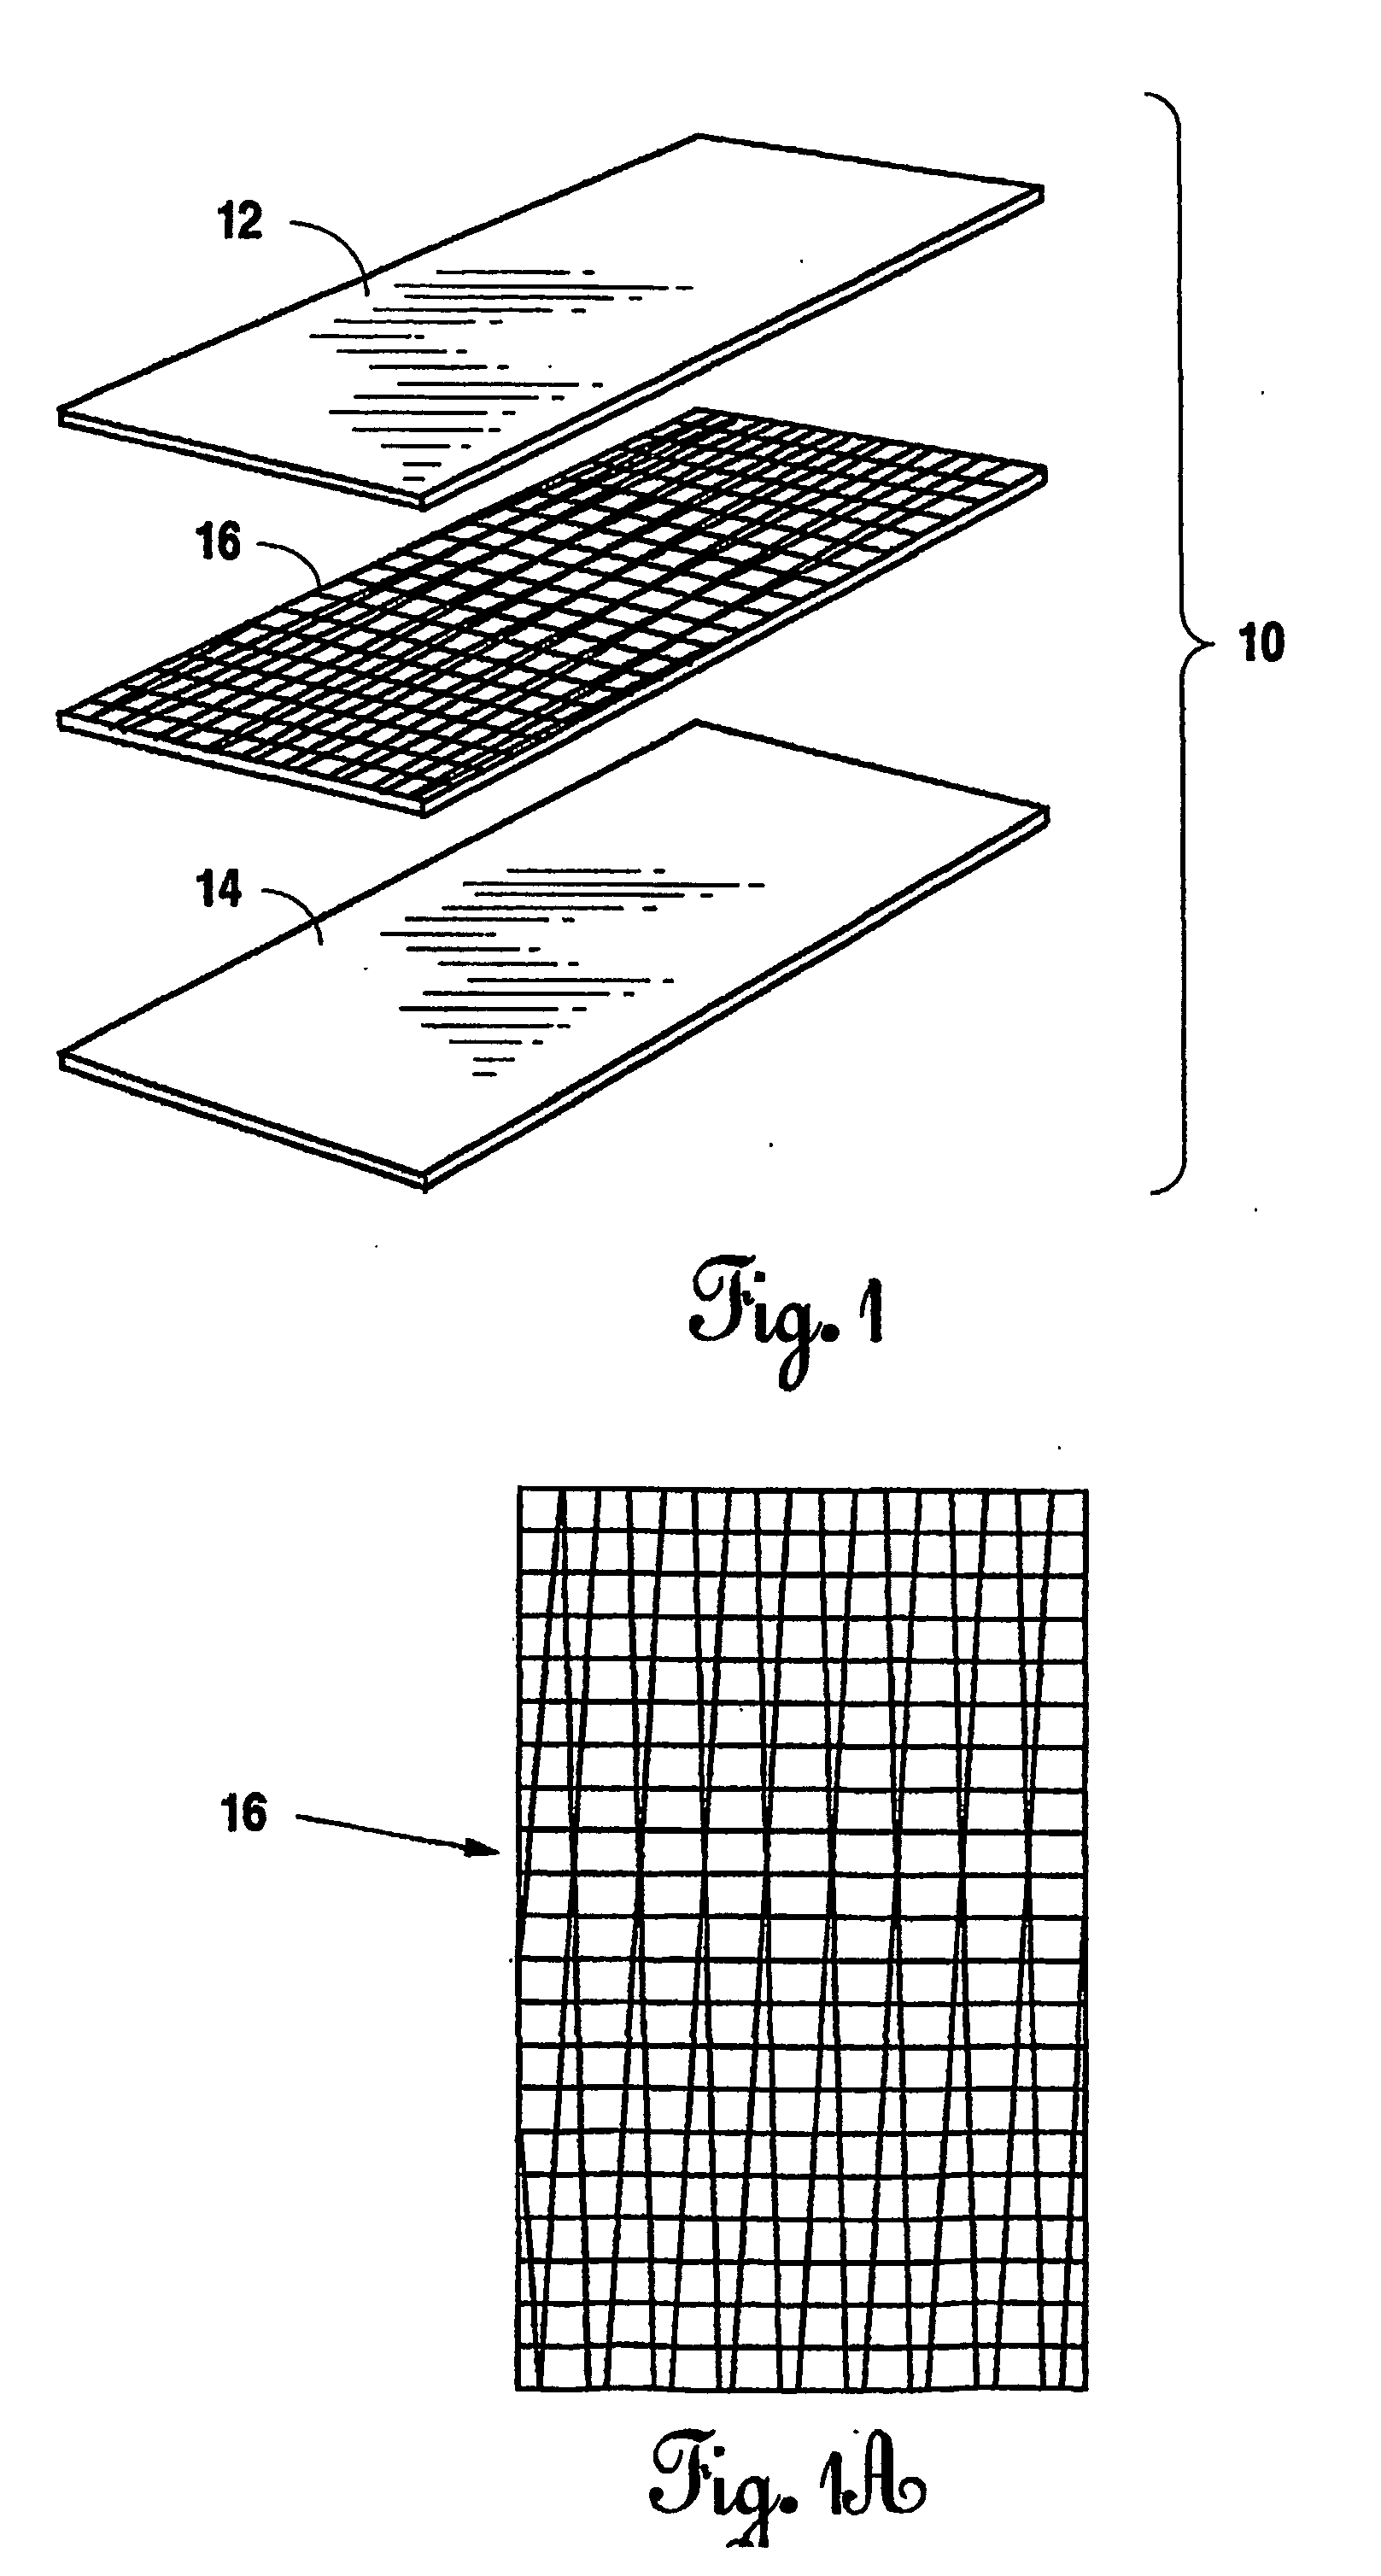 Reinforced paper product and method for making same